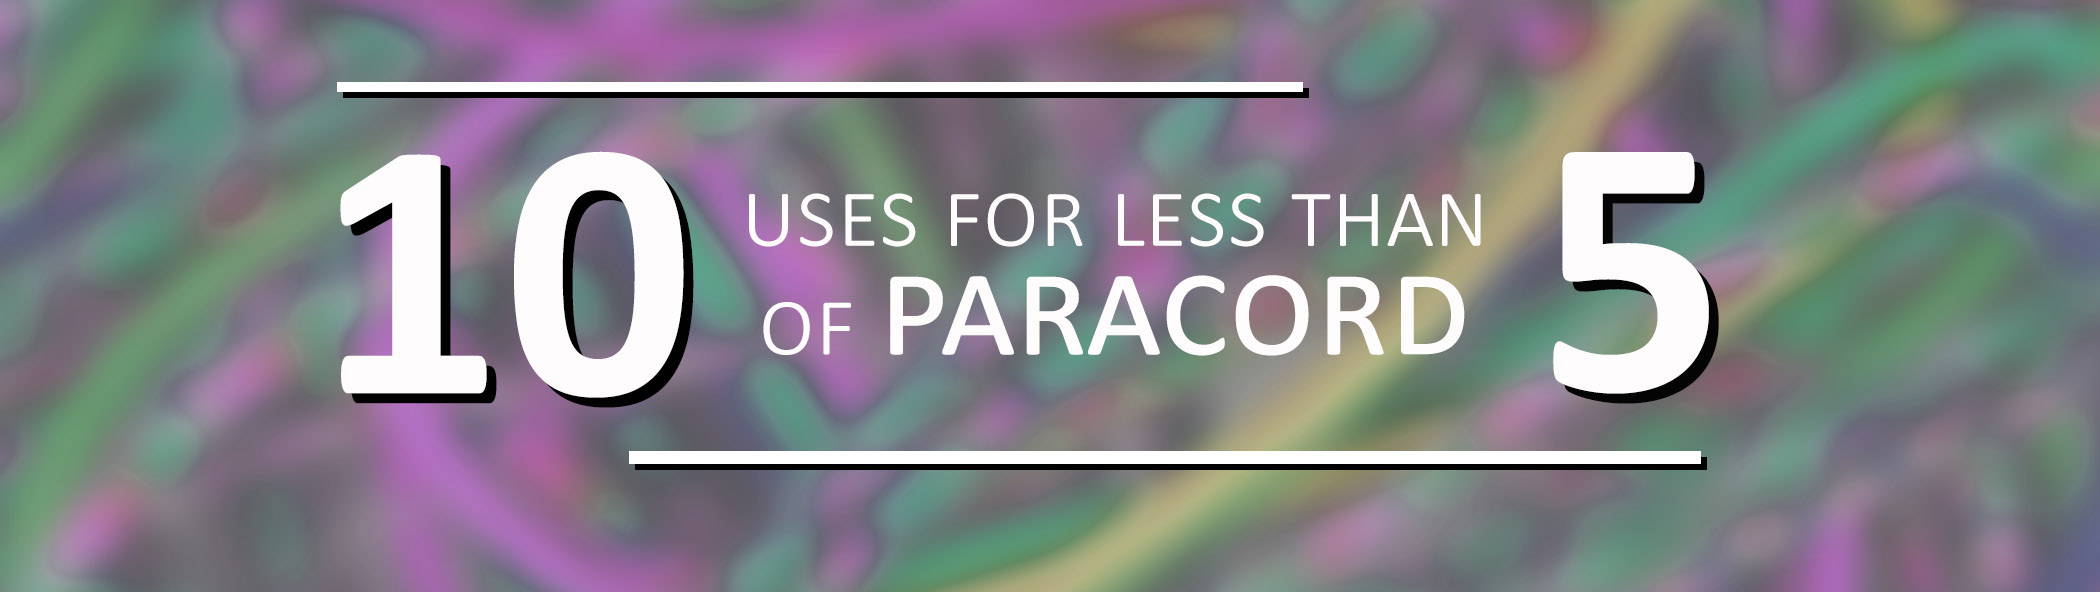 10 Uses for Less than 5ft of Paracord